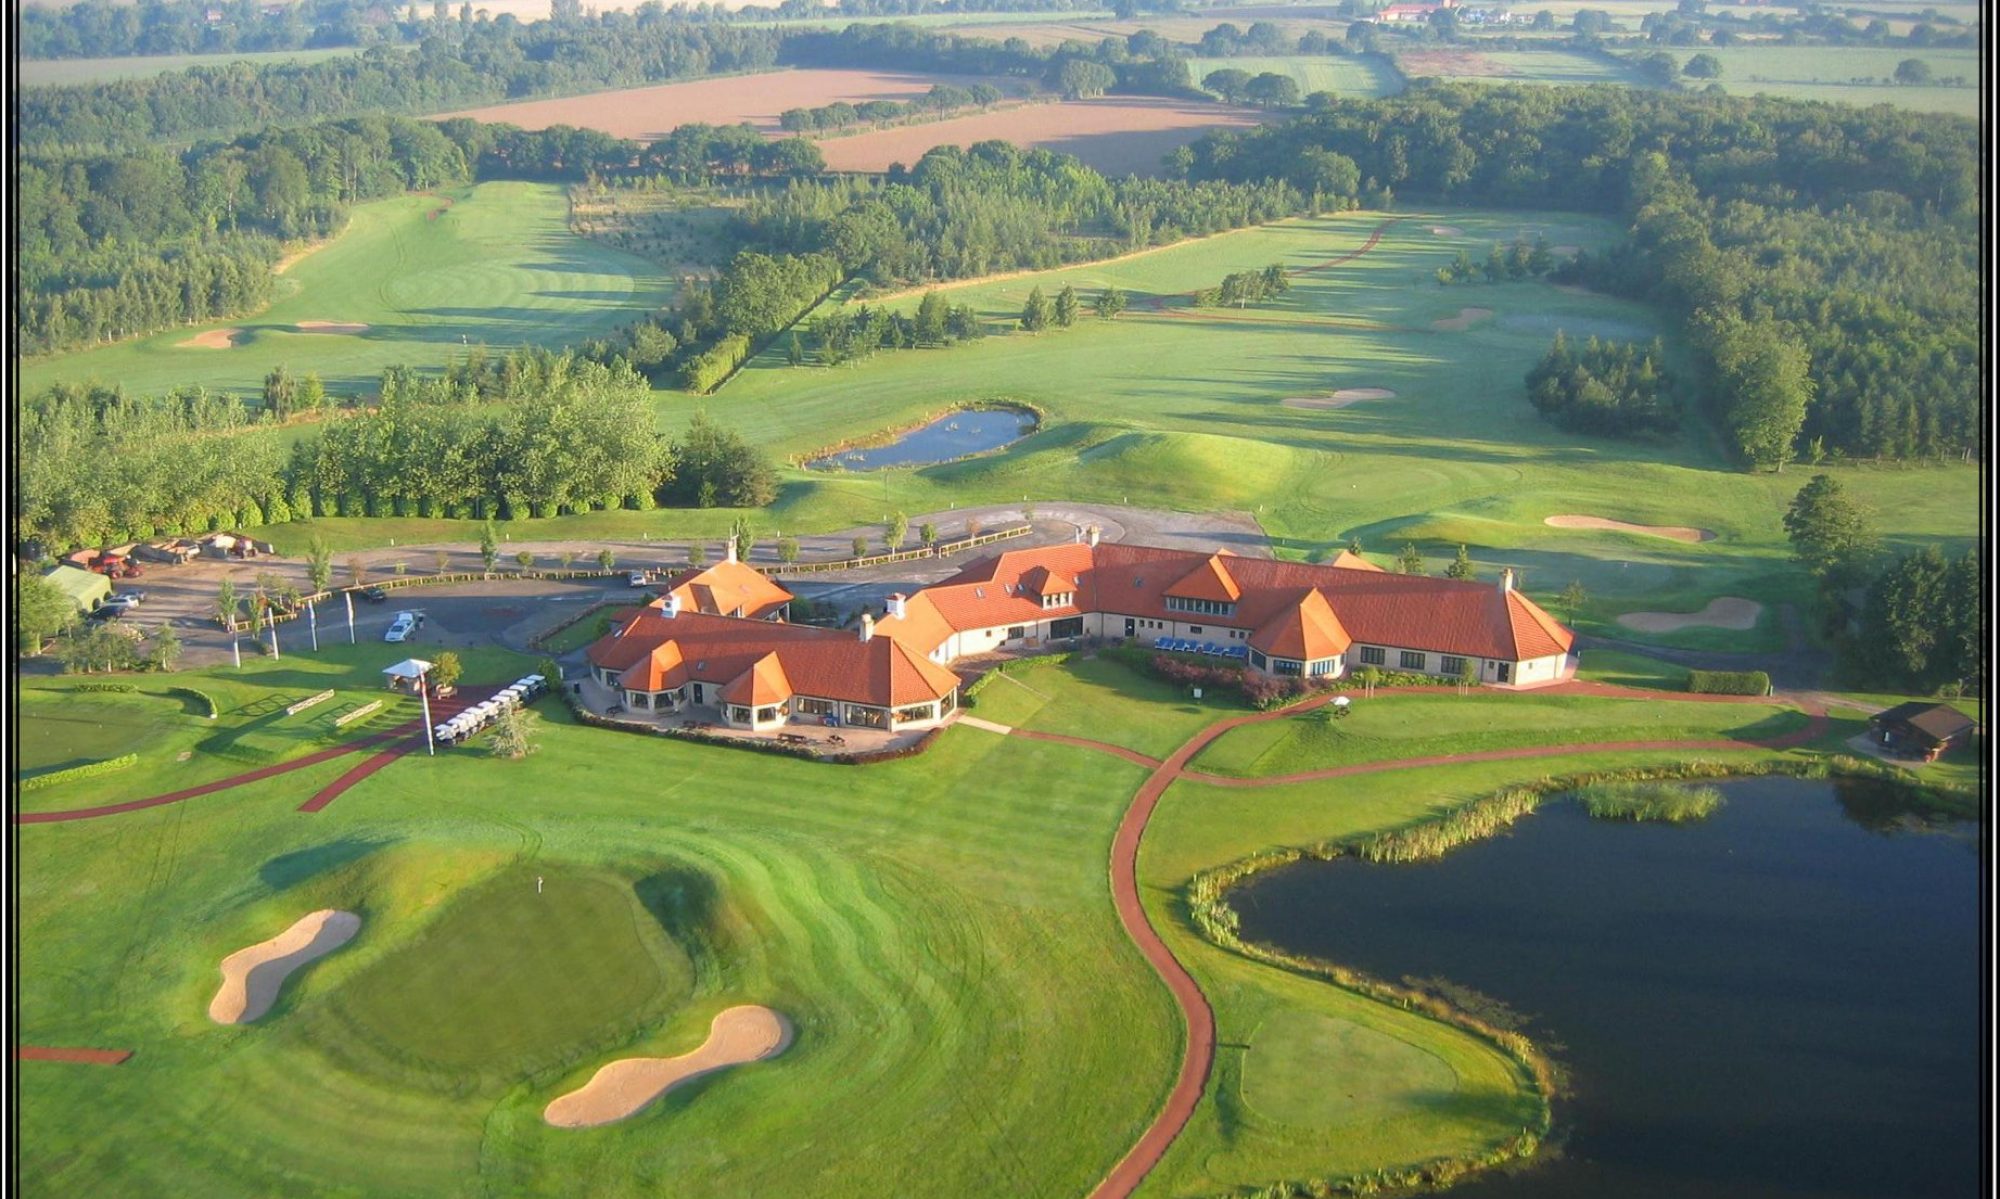 http://theoaksgolfclub.co.uk/wp-content/uploads/2019/07/cropped-COURSE-5-1.jpg